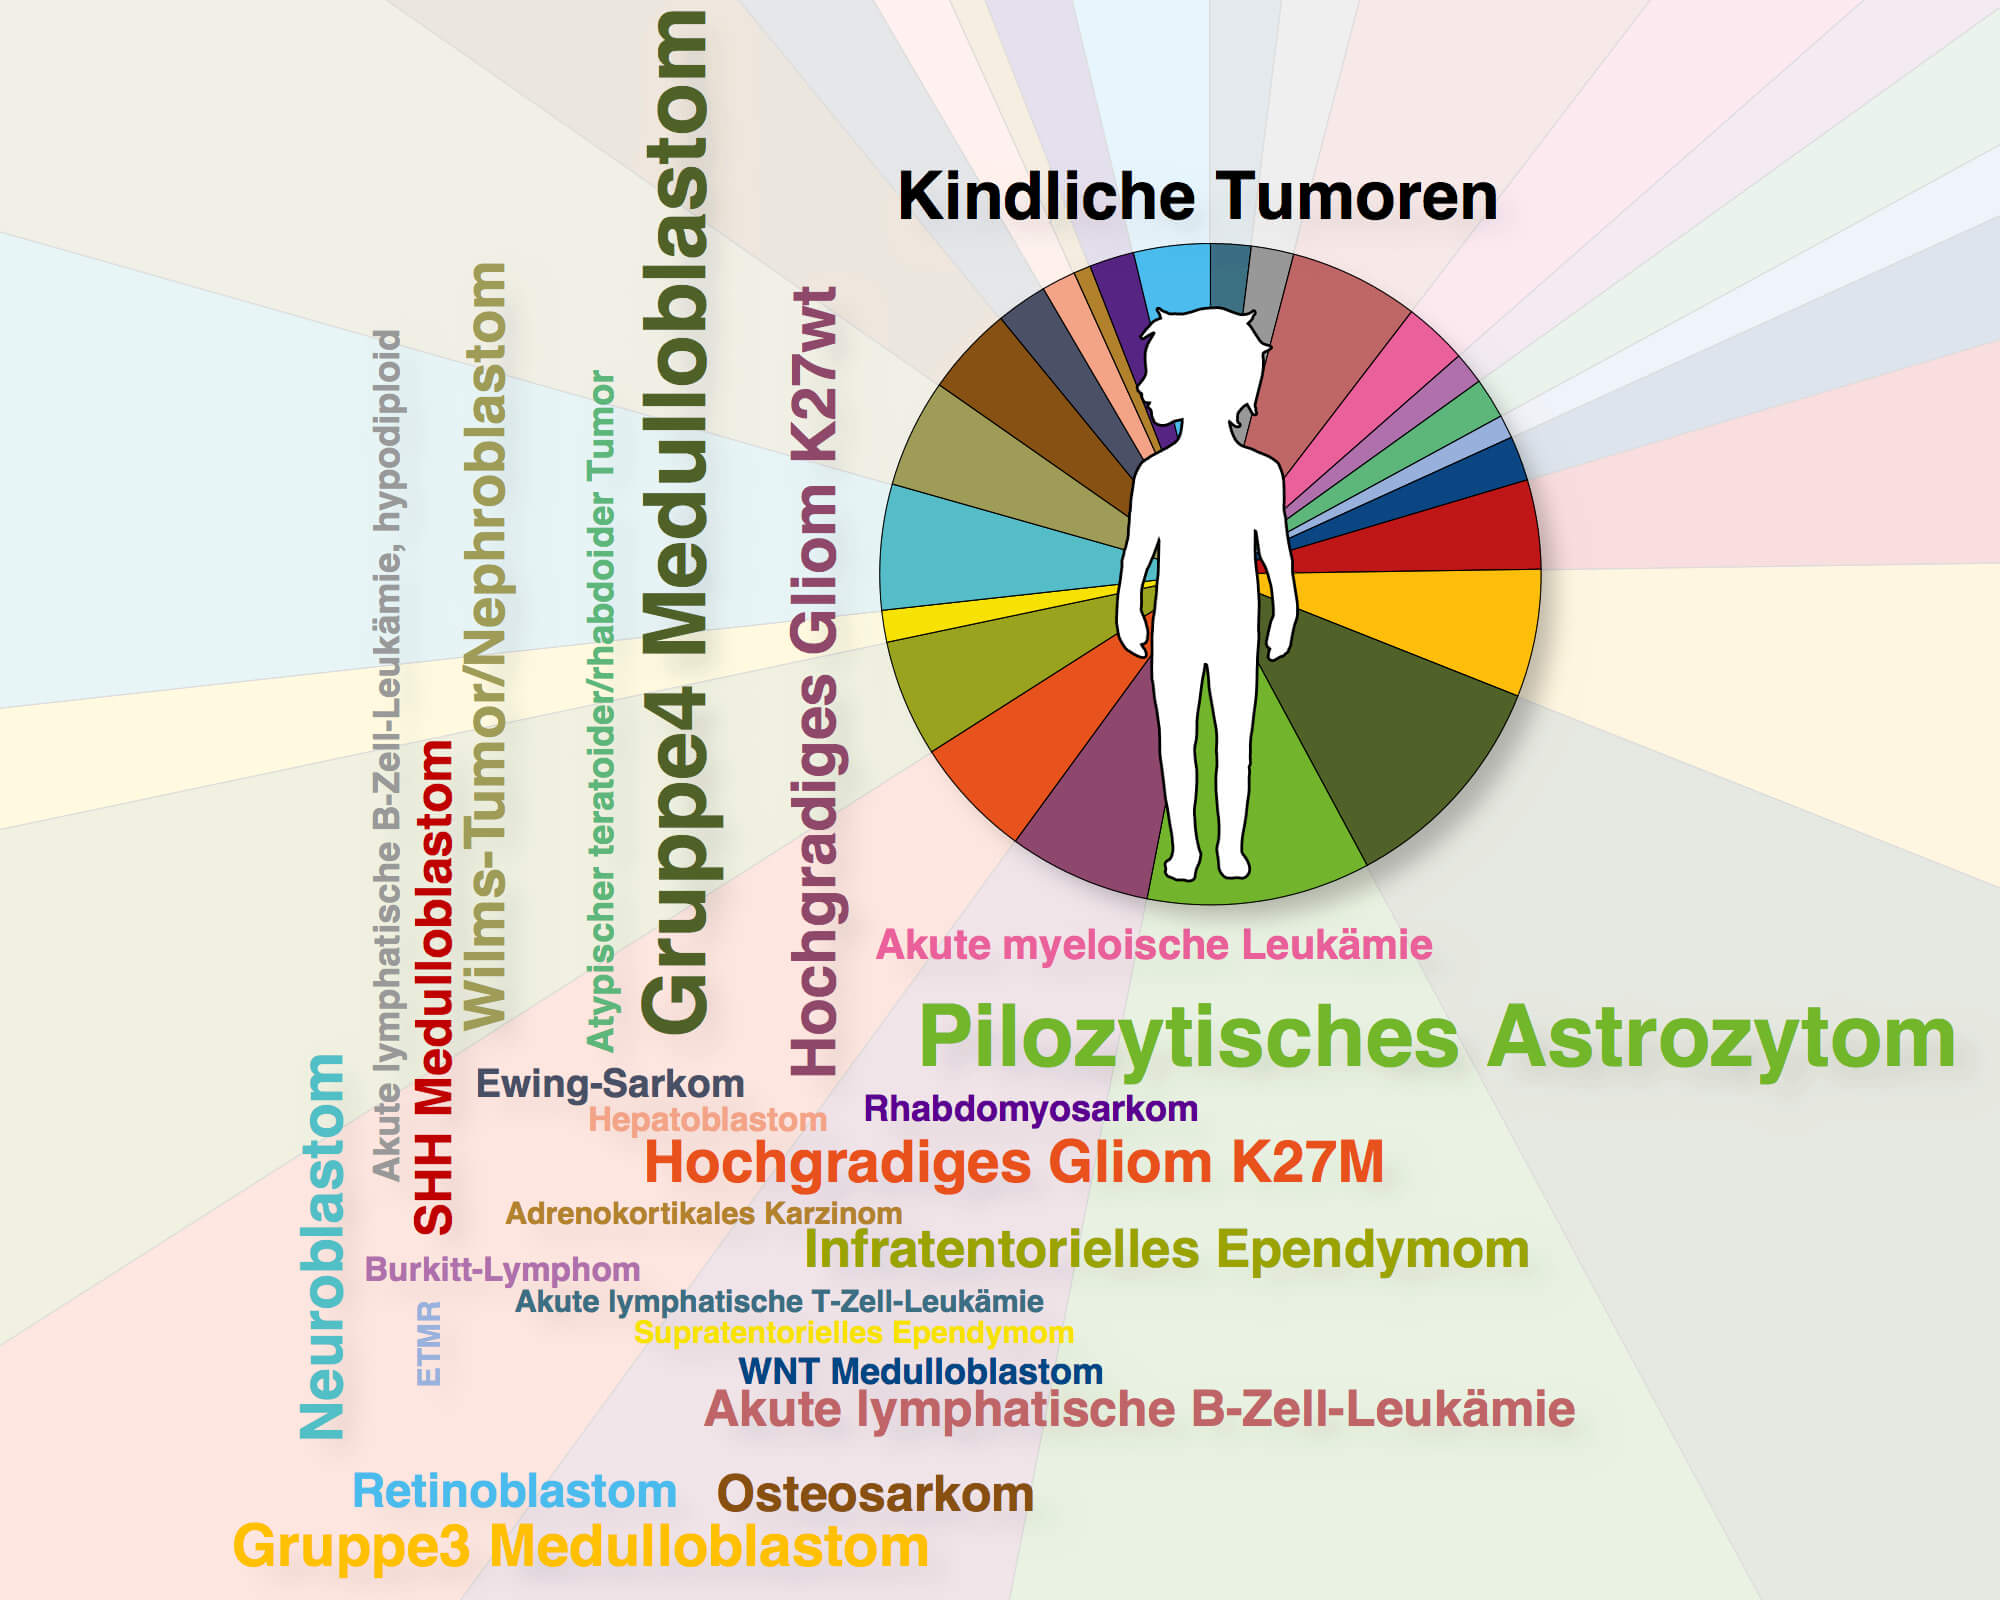 Graphical representation of the multitude of different subgroups of brain tumours in children.